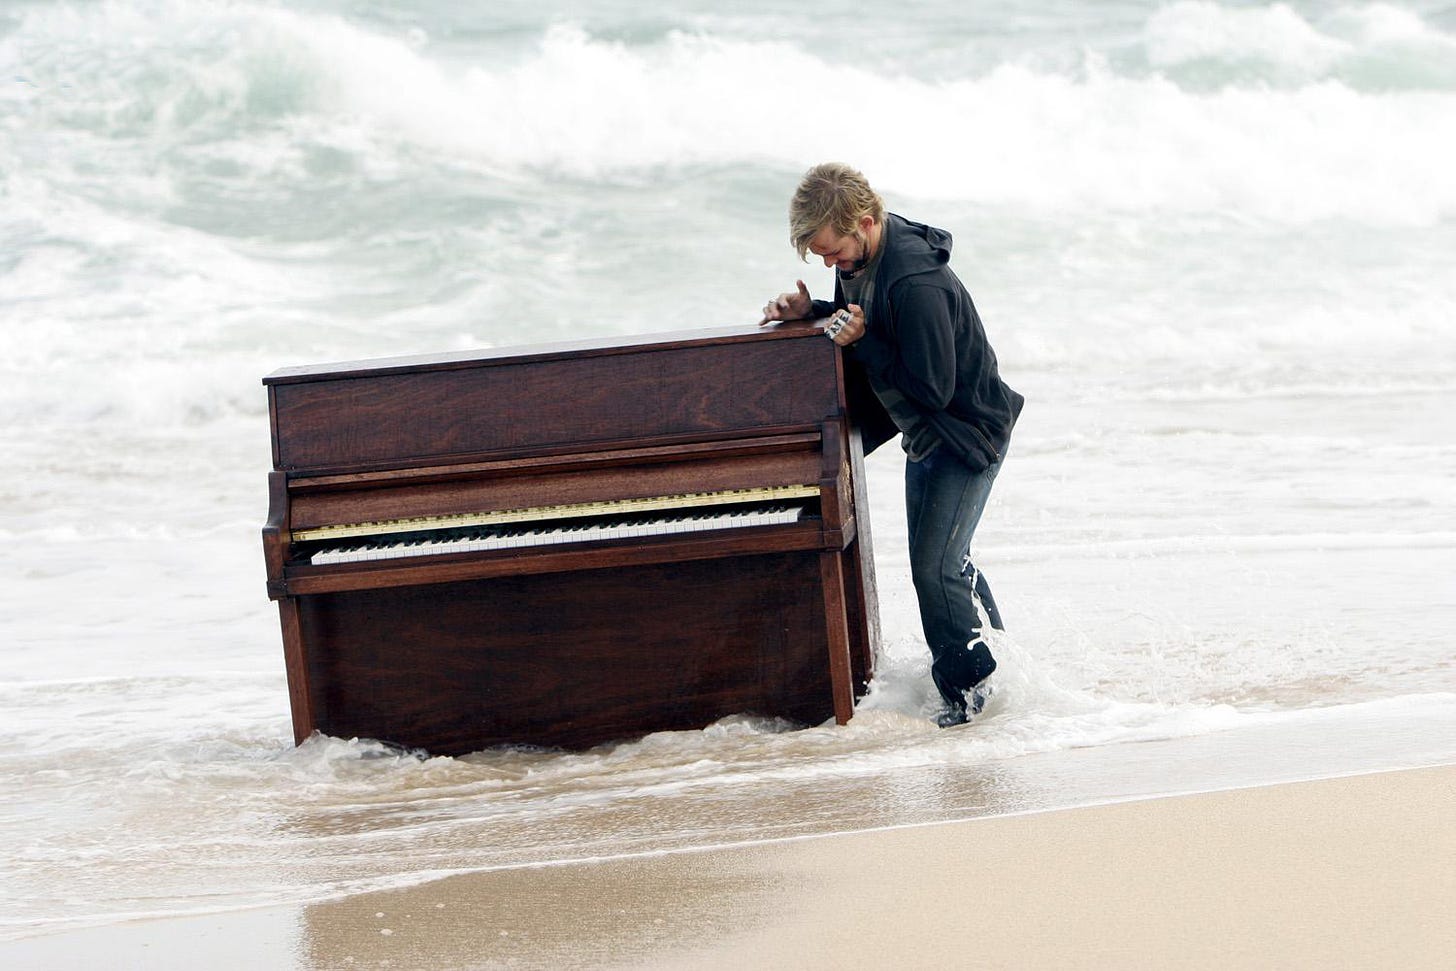 Charlie (Dominick Monaghan) struggles to open the top of a piano that is standing in the ocean.